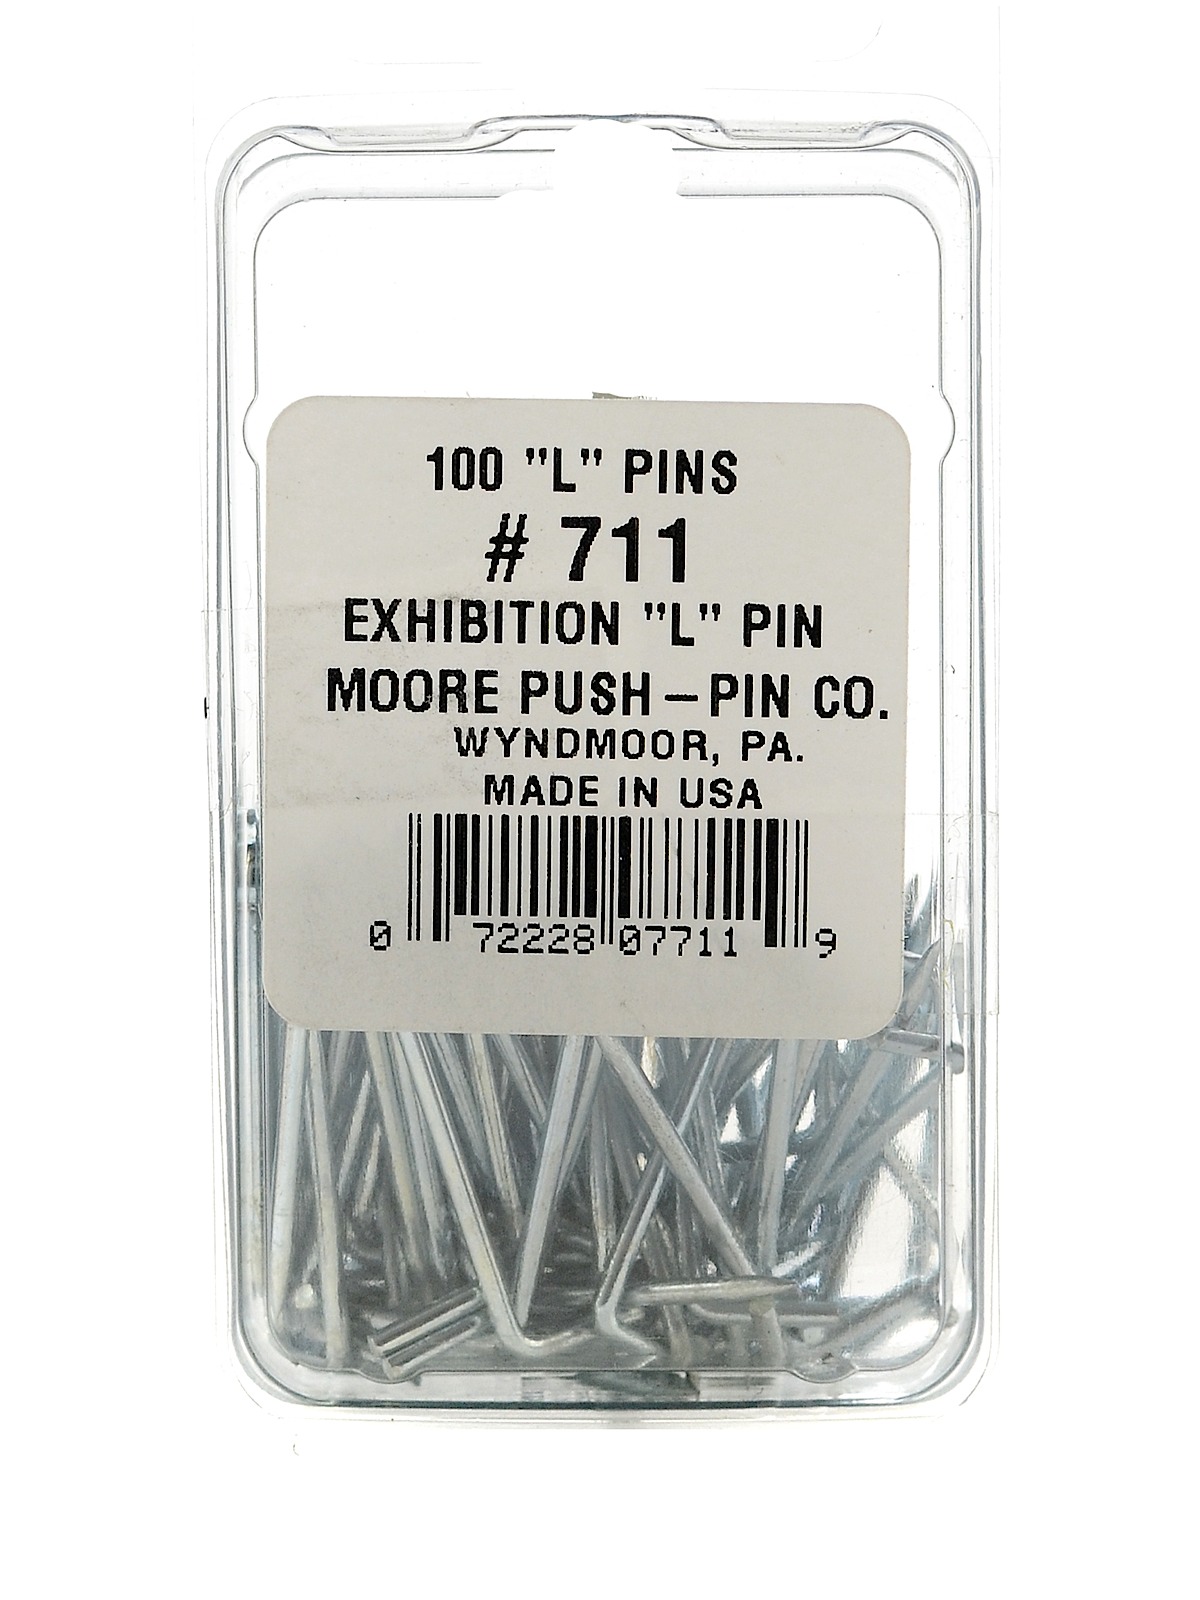 Exhibition L Pins Box Of 100